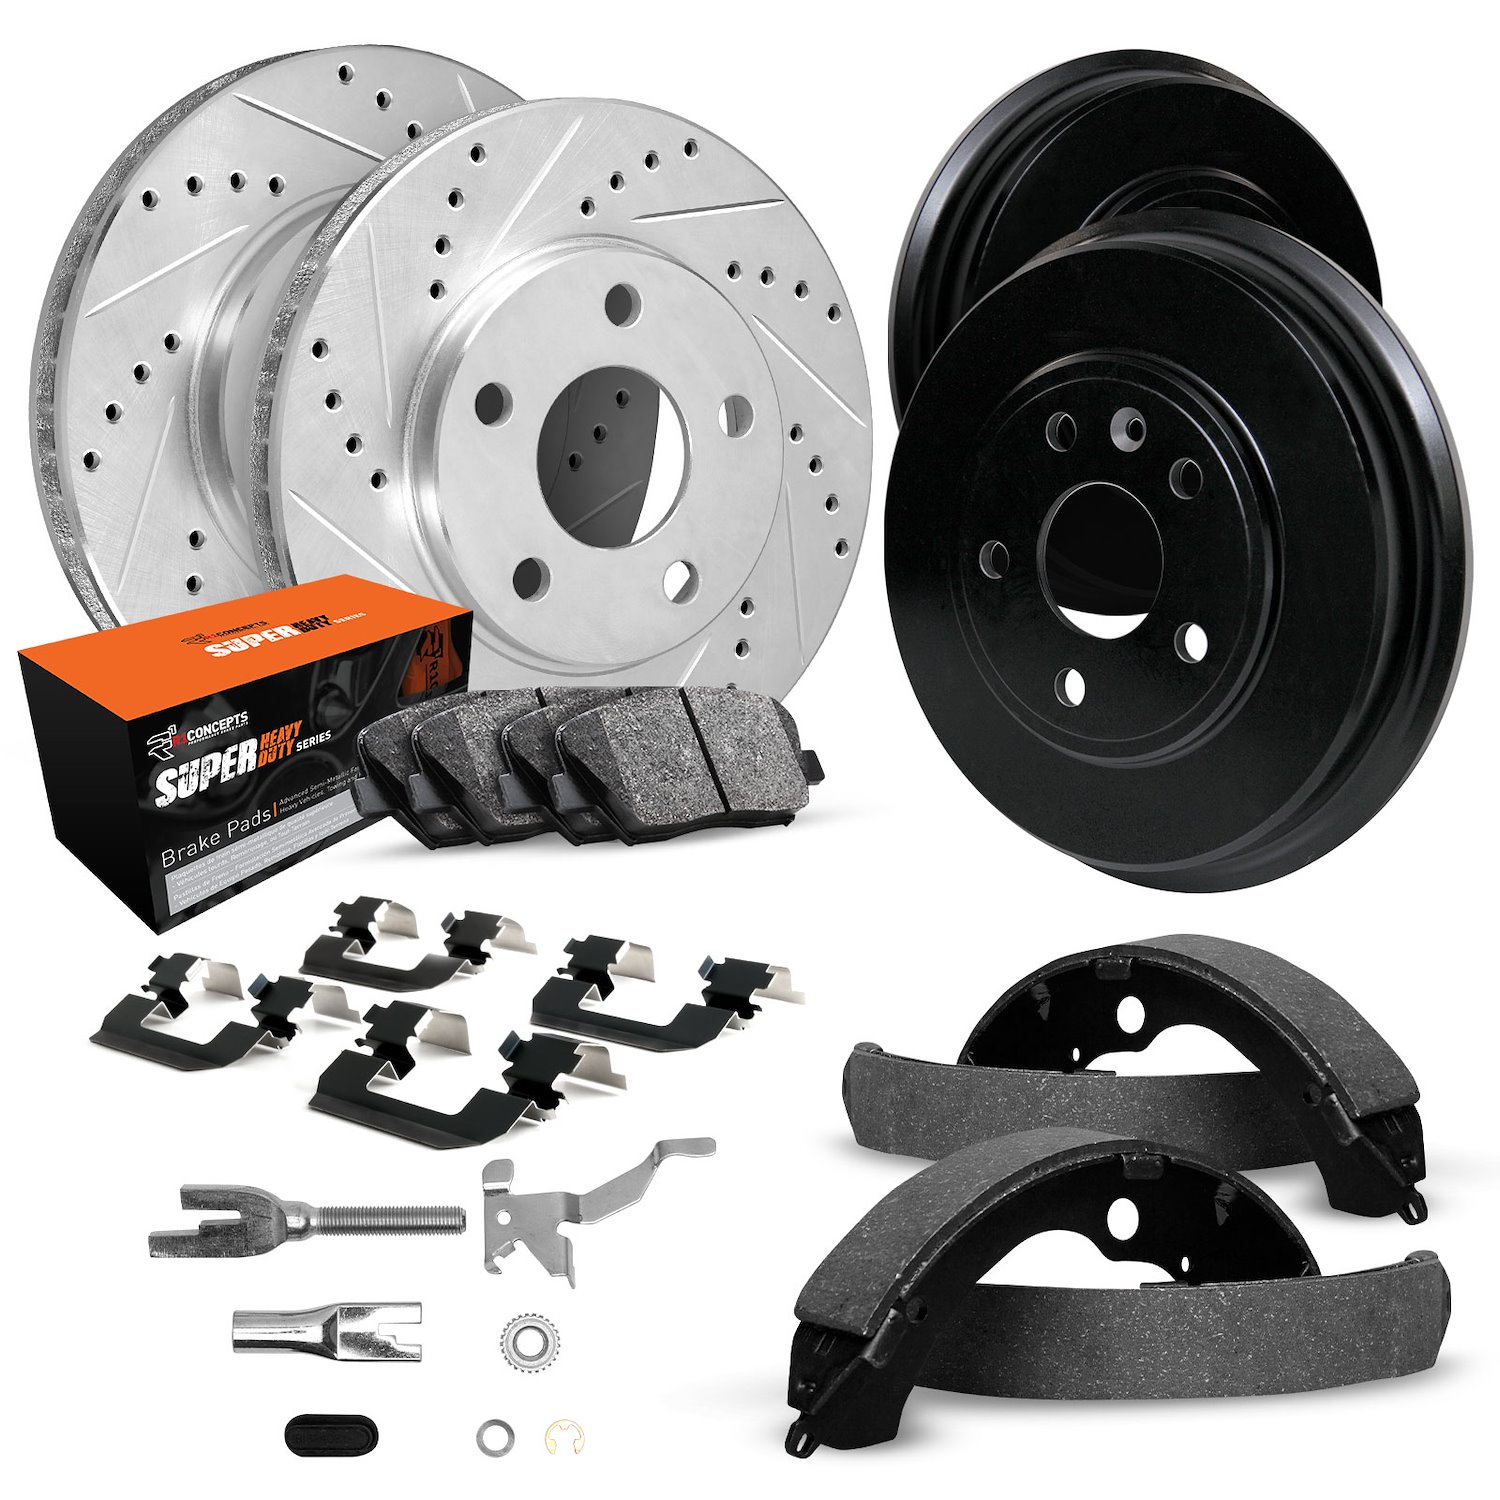 E-Line Drilled/Slotted Silver Rotor & Drum Set w/Super-Duty Pads, Shoes/Hardware/Adjusters, 2005-2005 GM